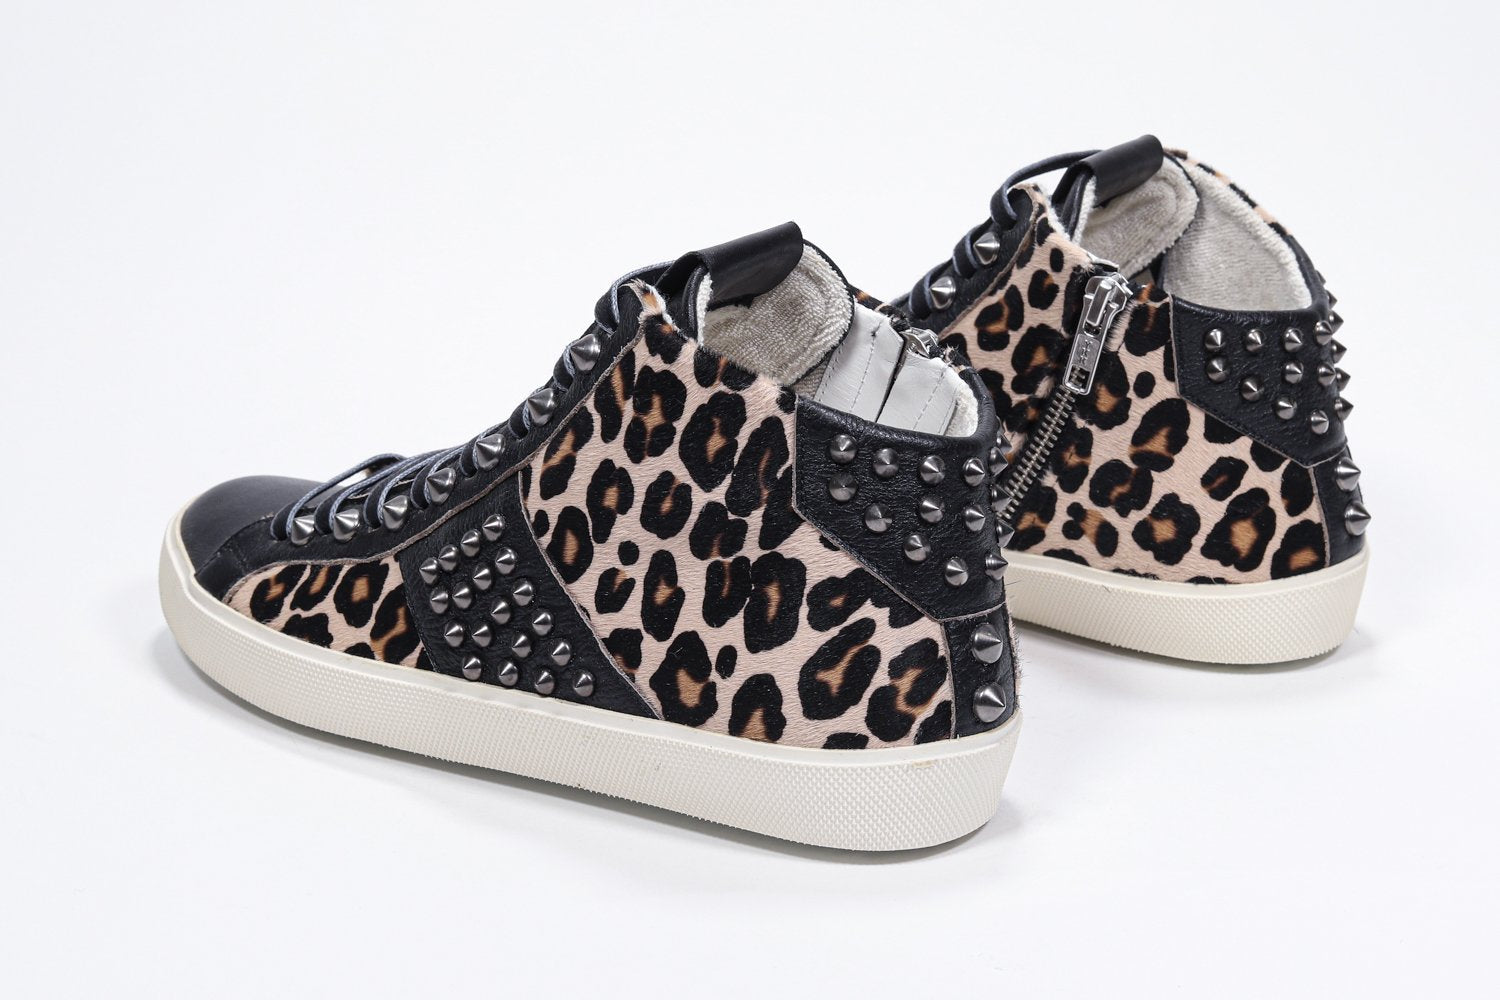 Three quarter back view of mid top leopard print sneaker. Haircalf and leather upper with studs, an internal zip and vintage rubber sole.